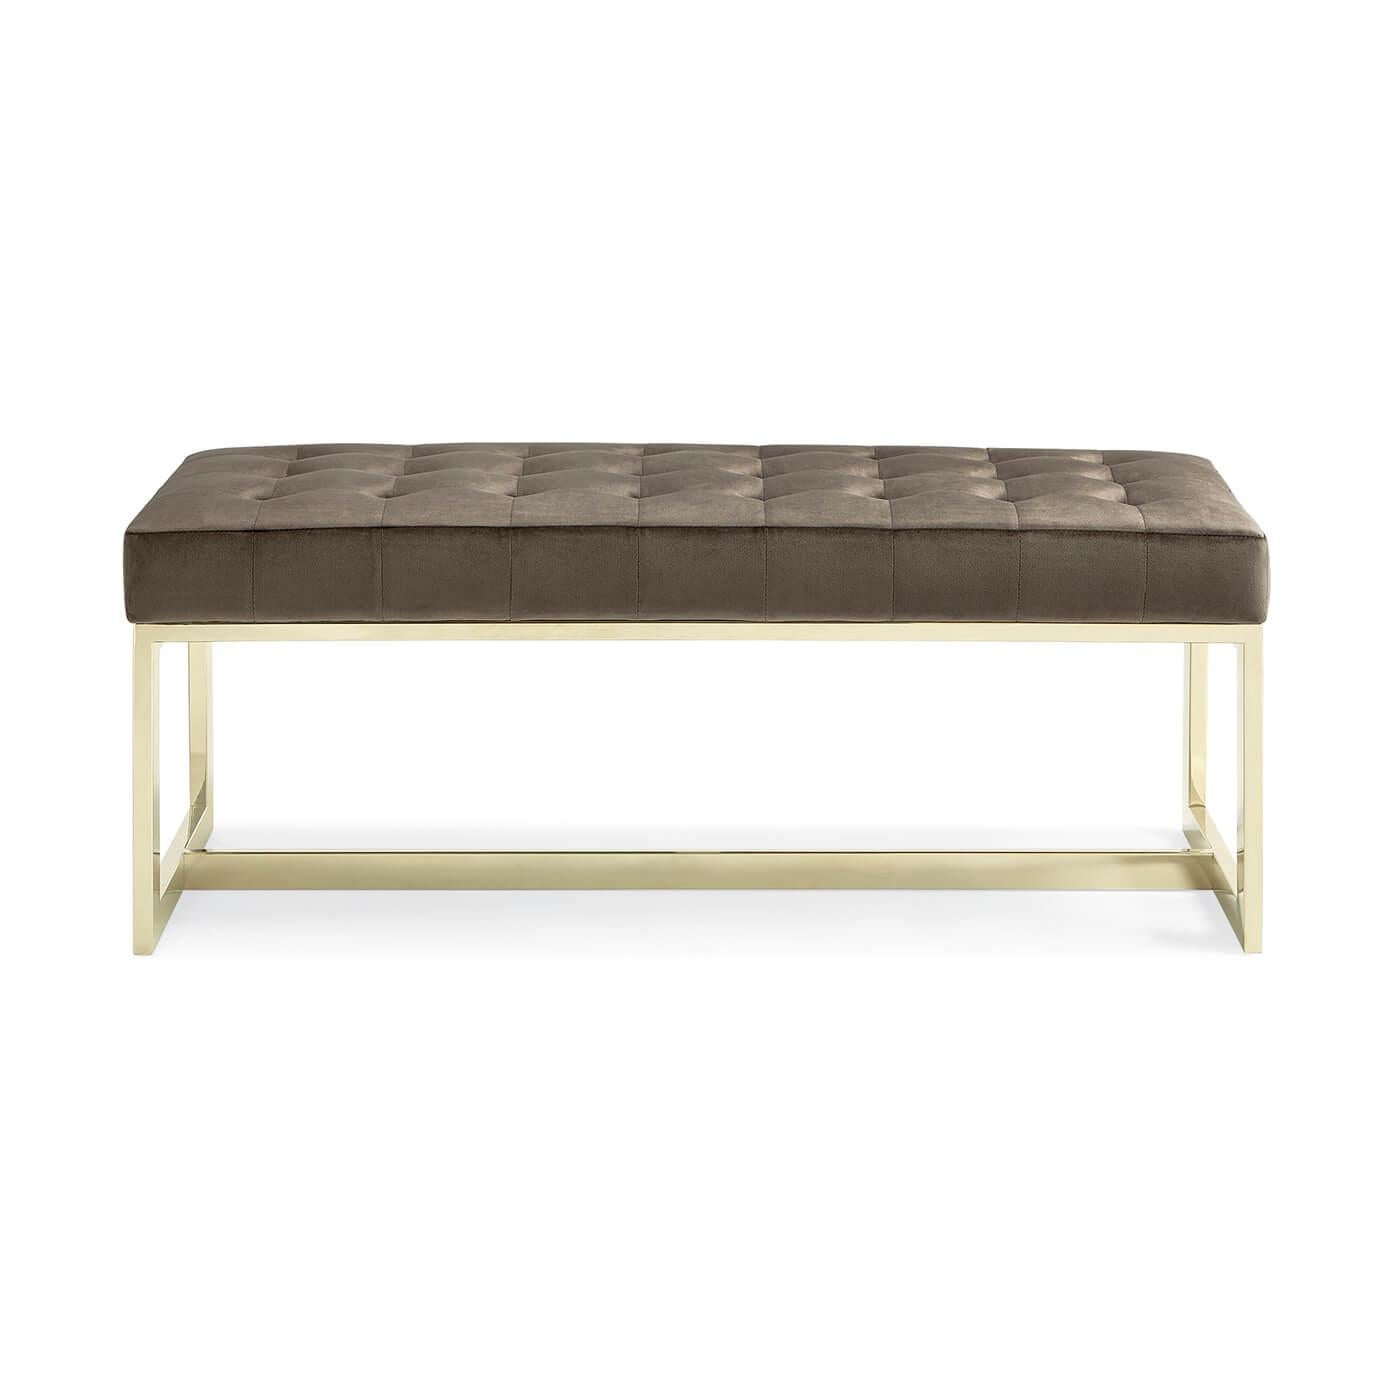 Modern tufted bench with a boxed velvet tufted seat cushion on a gold-plated metal box frame with stretcher. Practical, yet sophisticated, this is a must-have addition to update any bedroom.

Dimensions: 44